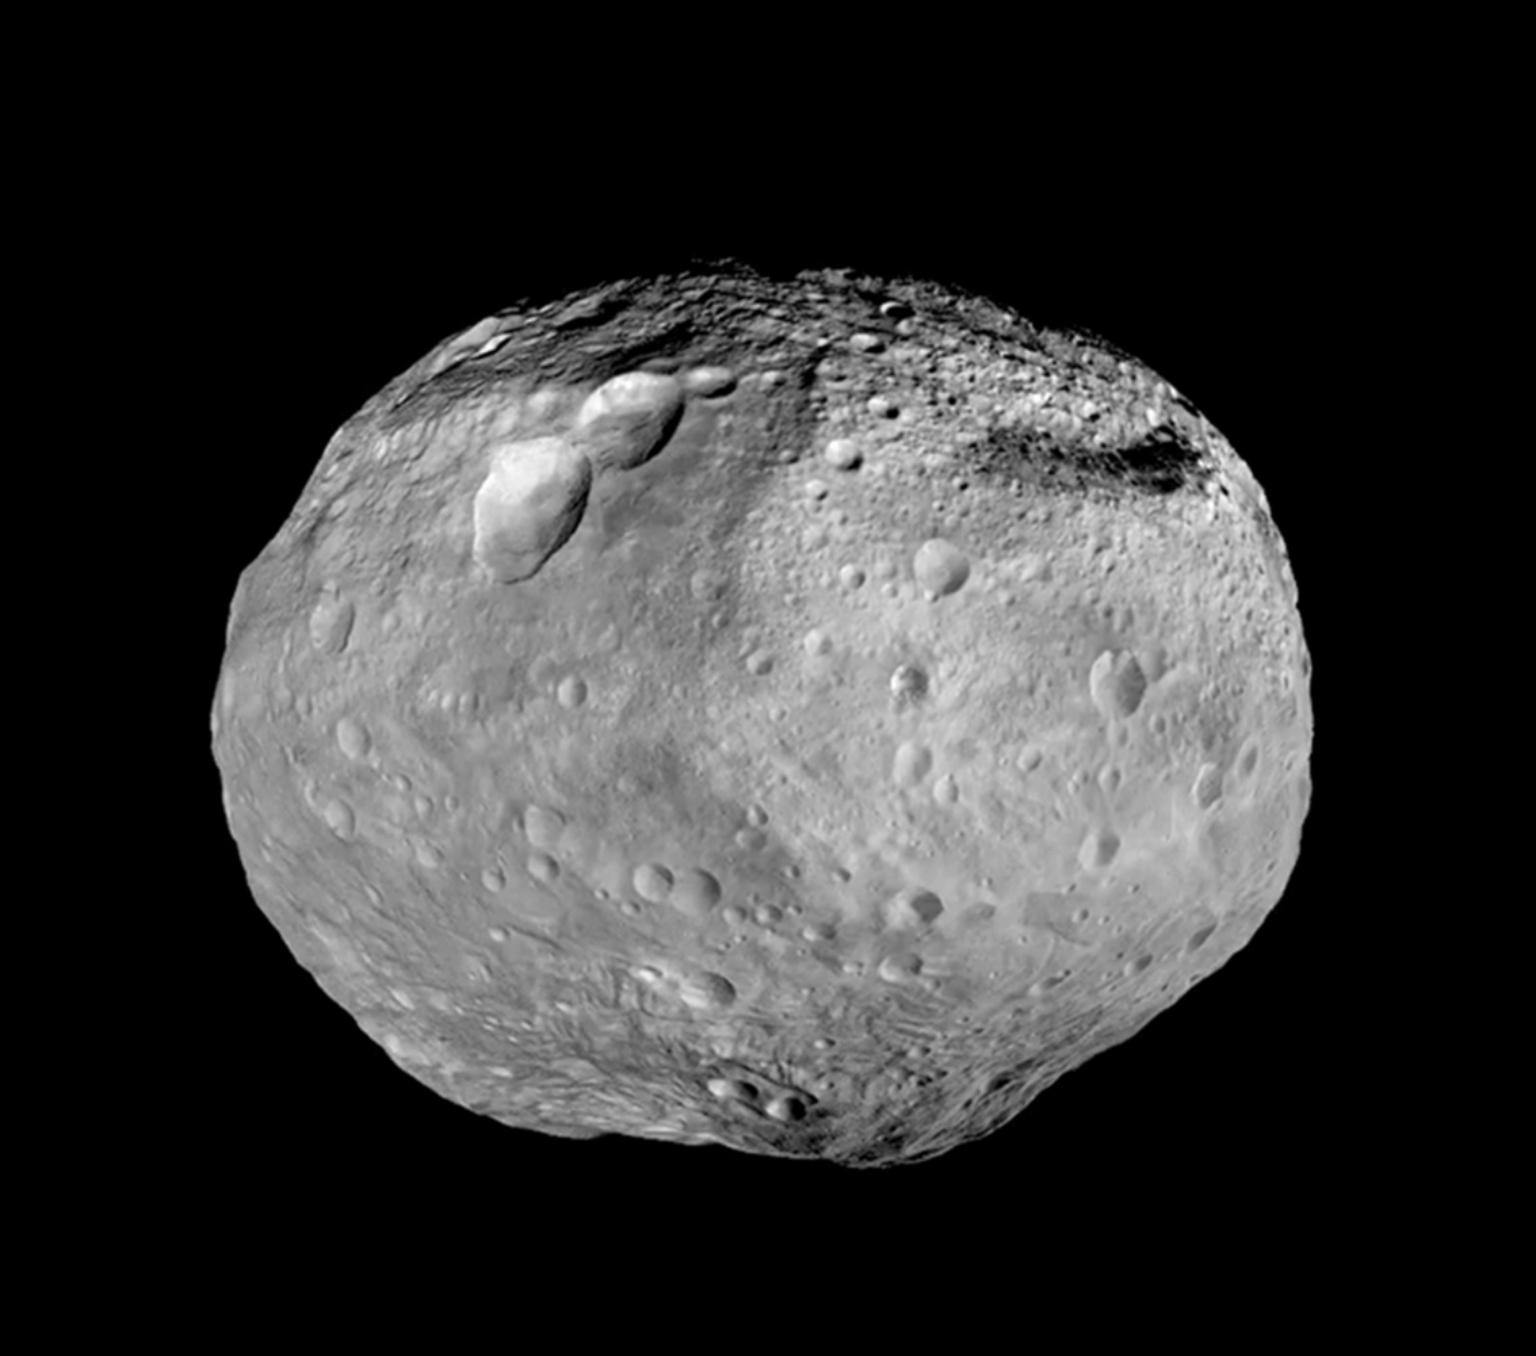 black and white image of an asteroid. It is a grey round rock with dents.